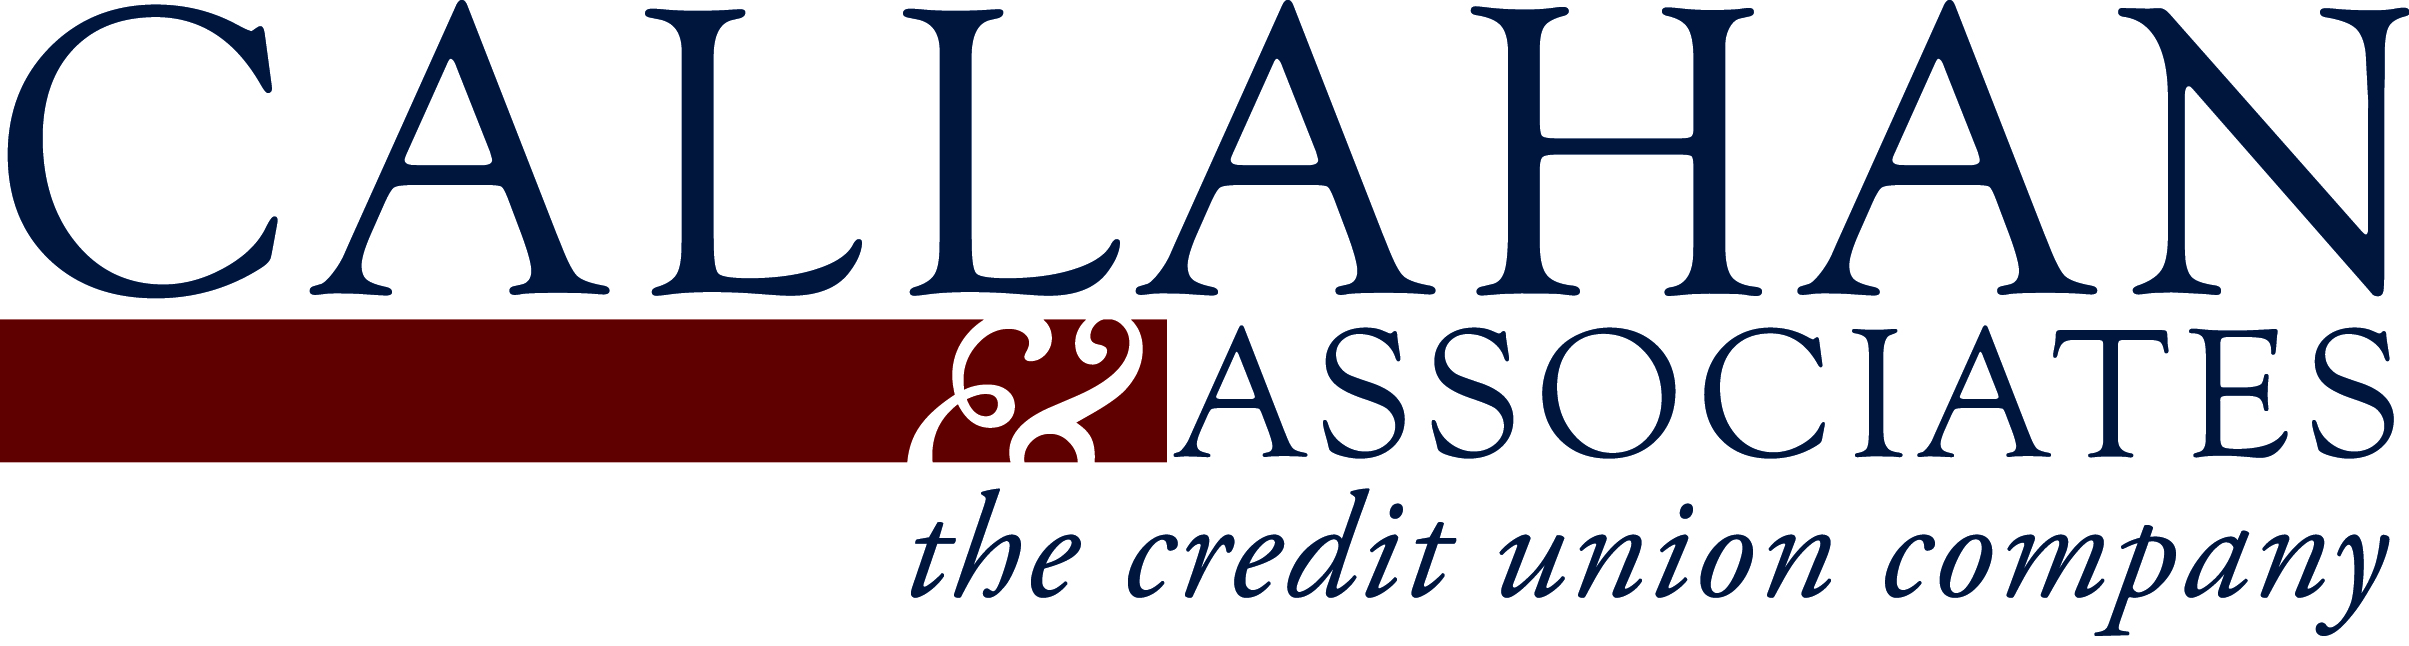 Callahan & Associates and CU Strategic Planning Combine To Increase Credit Union Impact